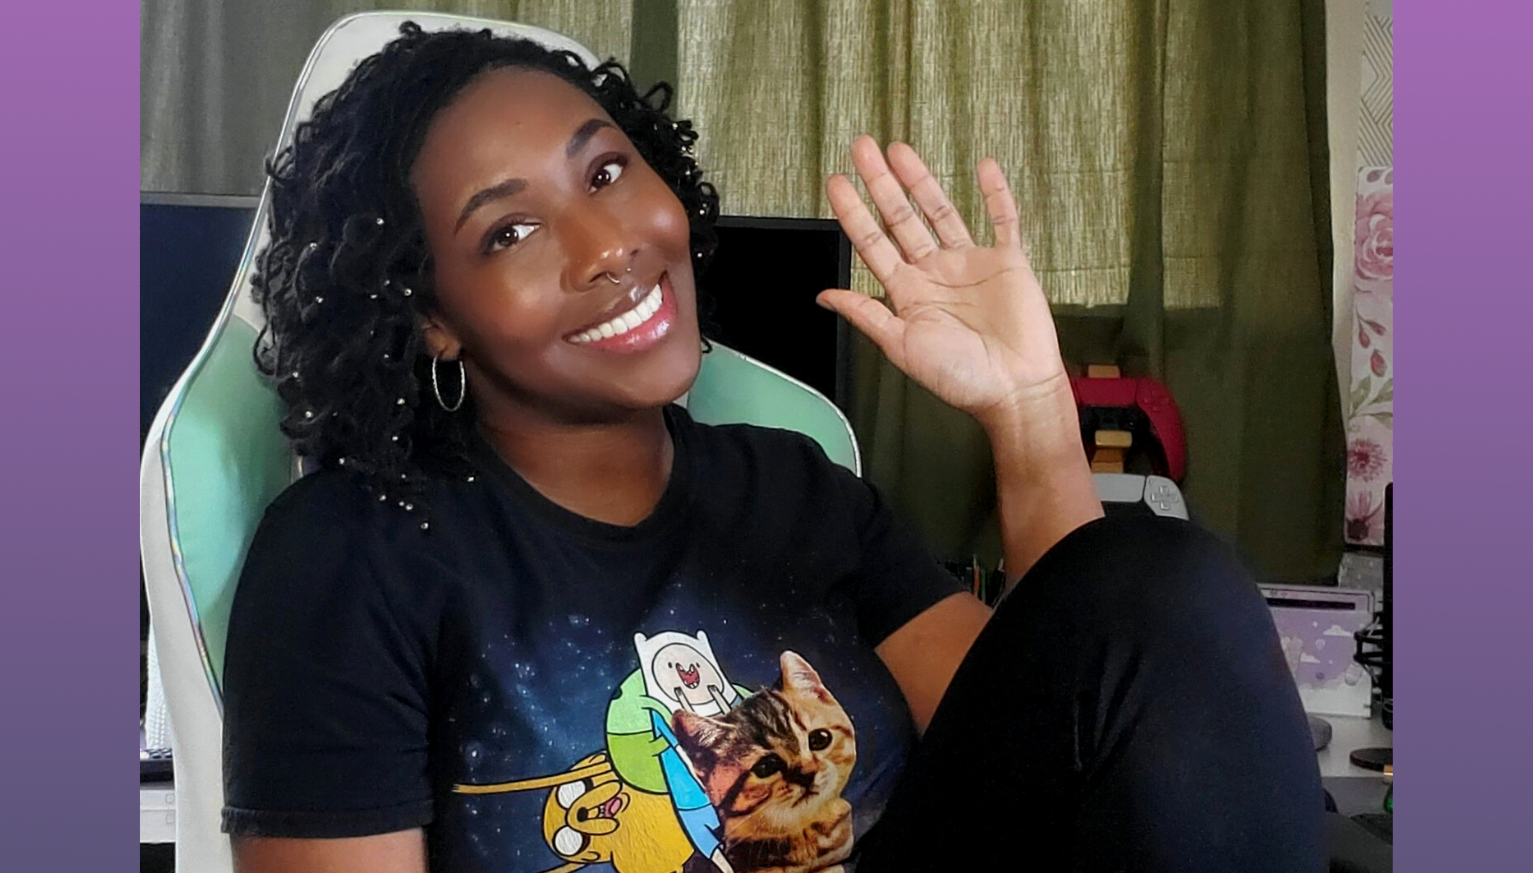 Jasmine Taylor at her desk smiling, waving, and wearing an Adventure Time t-shirt